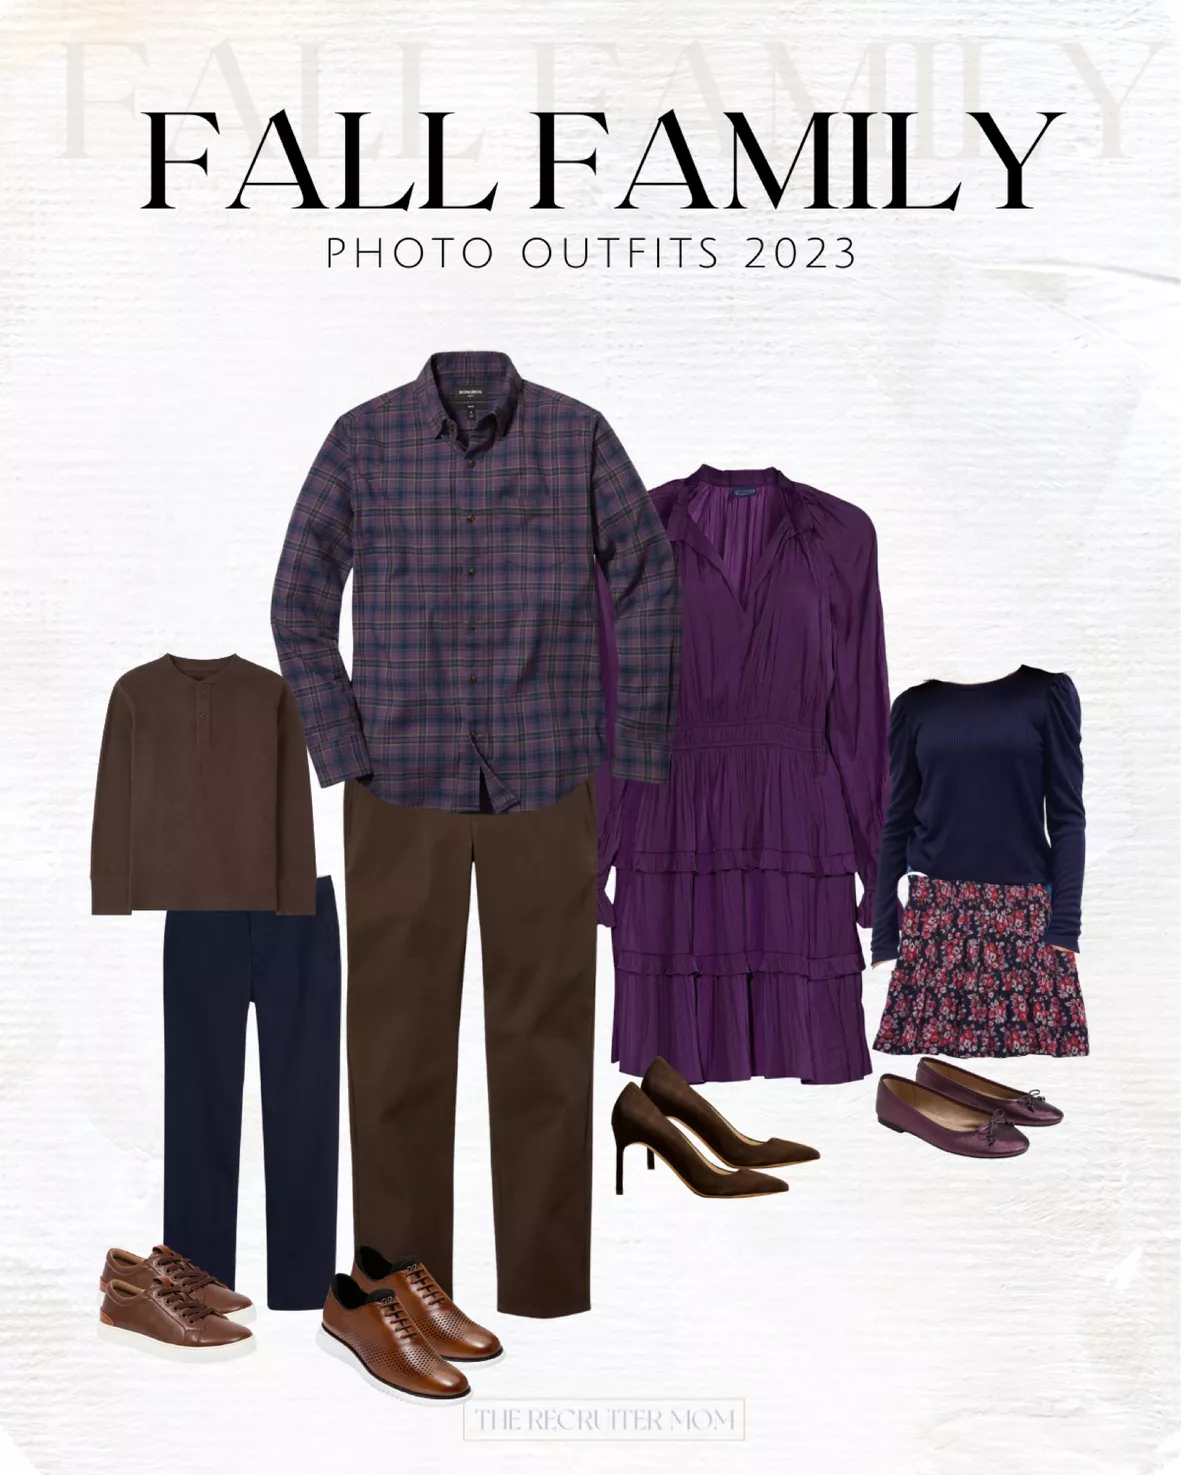 Fall Family Photo Outfits 2023